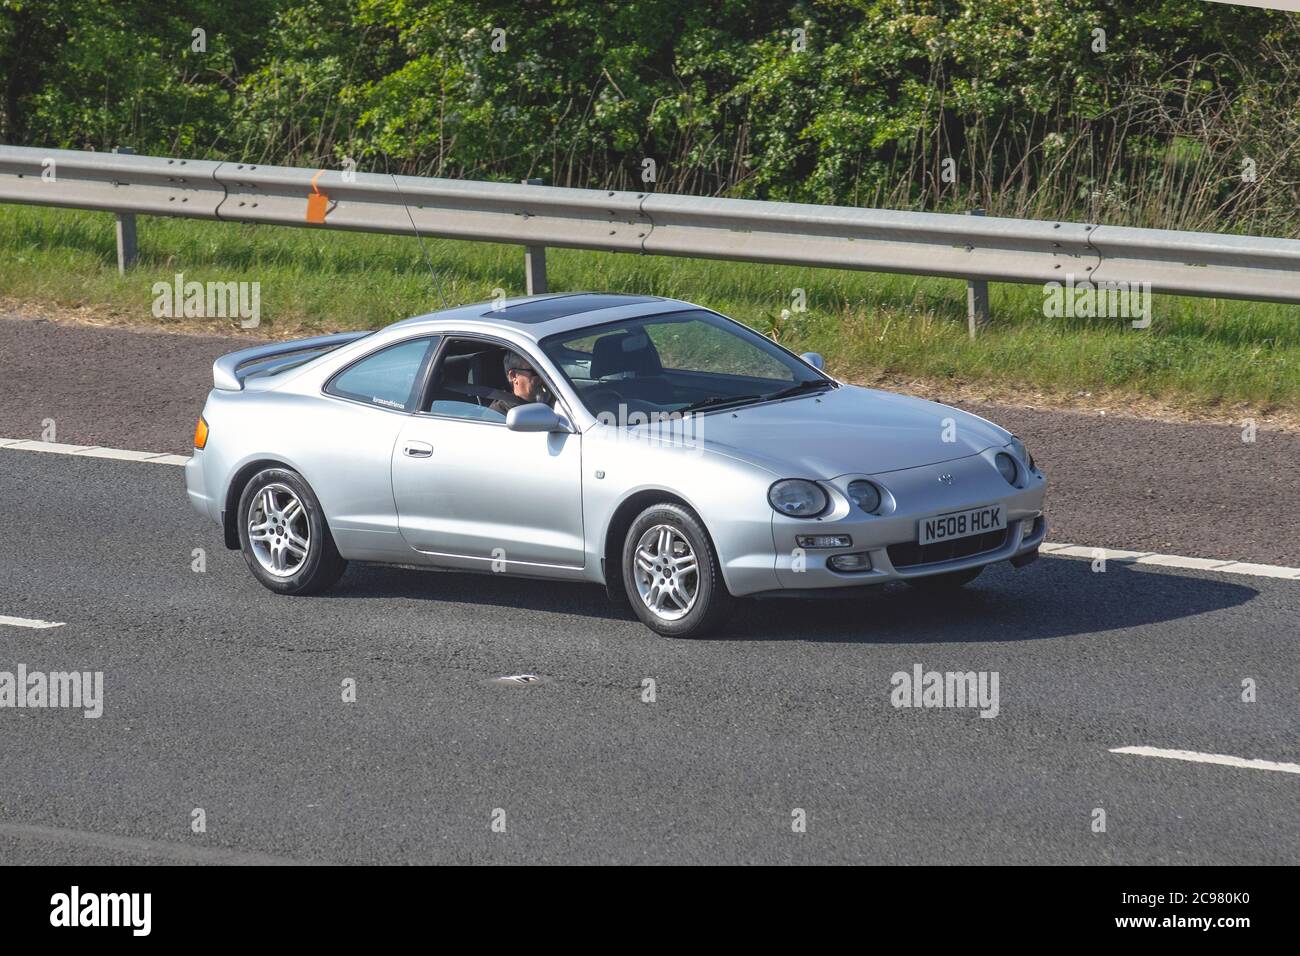 1996 90s silver Toyota Celica ST; Vehicular traffic moving vehicles, cars driving vehicle on UK roads, motors, motoring on the M6 motorway highway network. Stock Photo